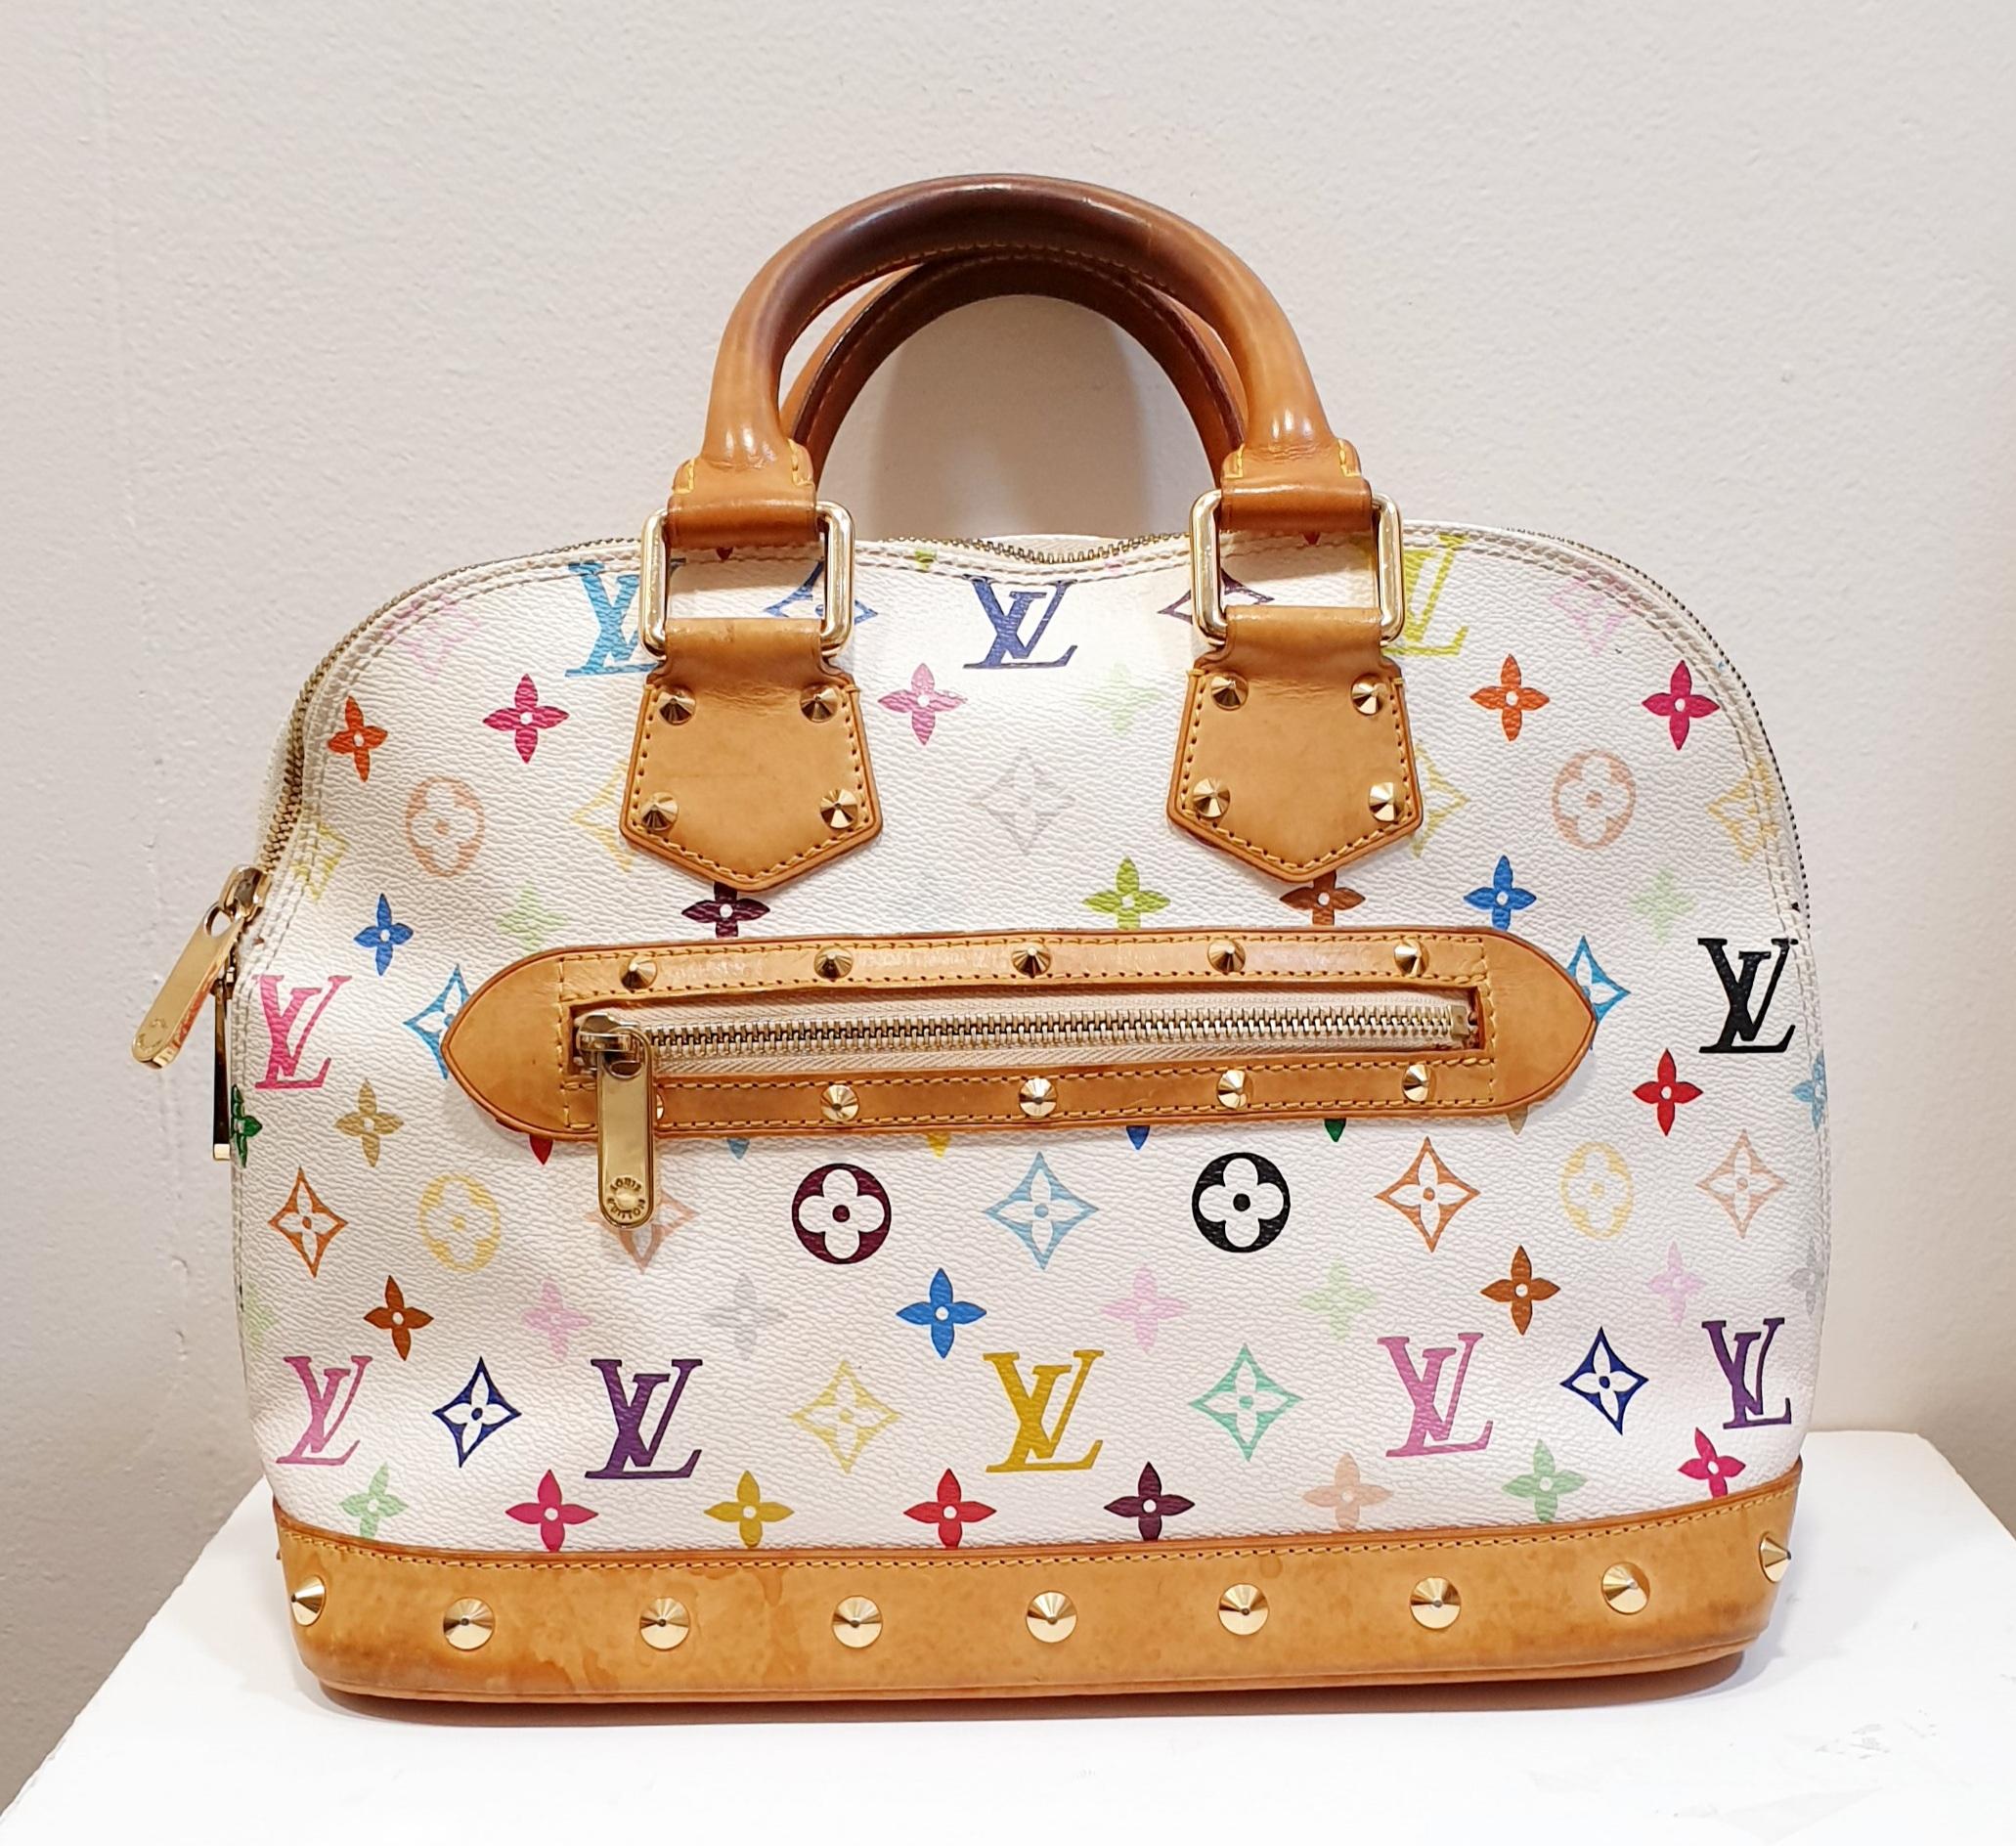 This Louis Vuitton Monogram Multicolor Alma Bag is made for anyone with impeccable taste. It features quality details such as golden studs throughout the leather trim. With its classic shape and roomy interior, this stunning piece will also make a